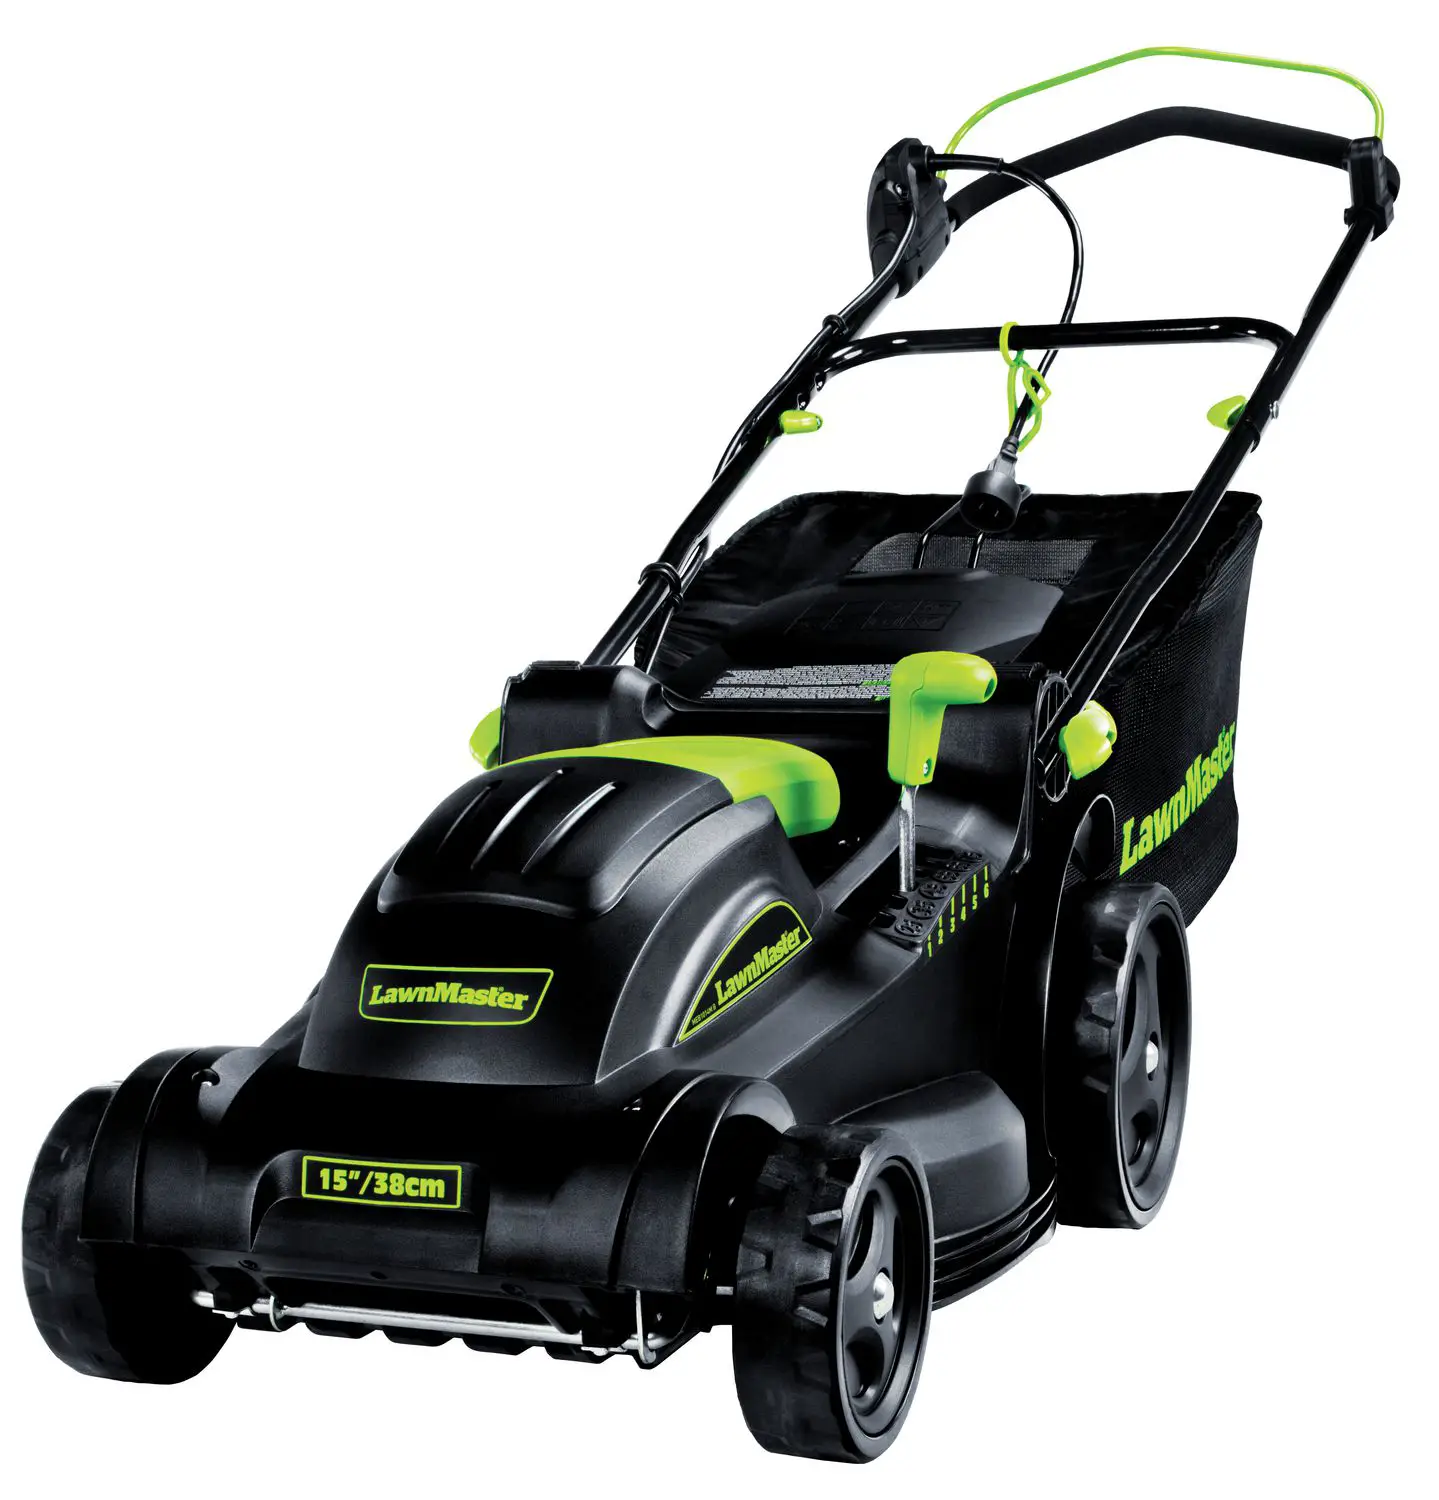 LawnMaster 15â? Electric Lawn Mower with Collection Bag